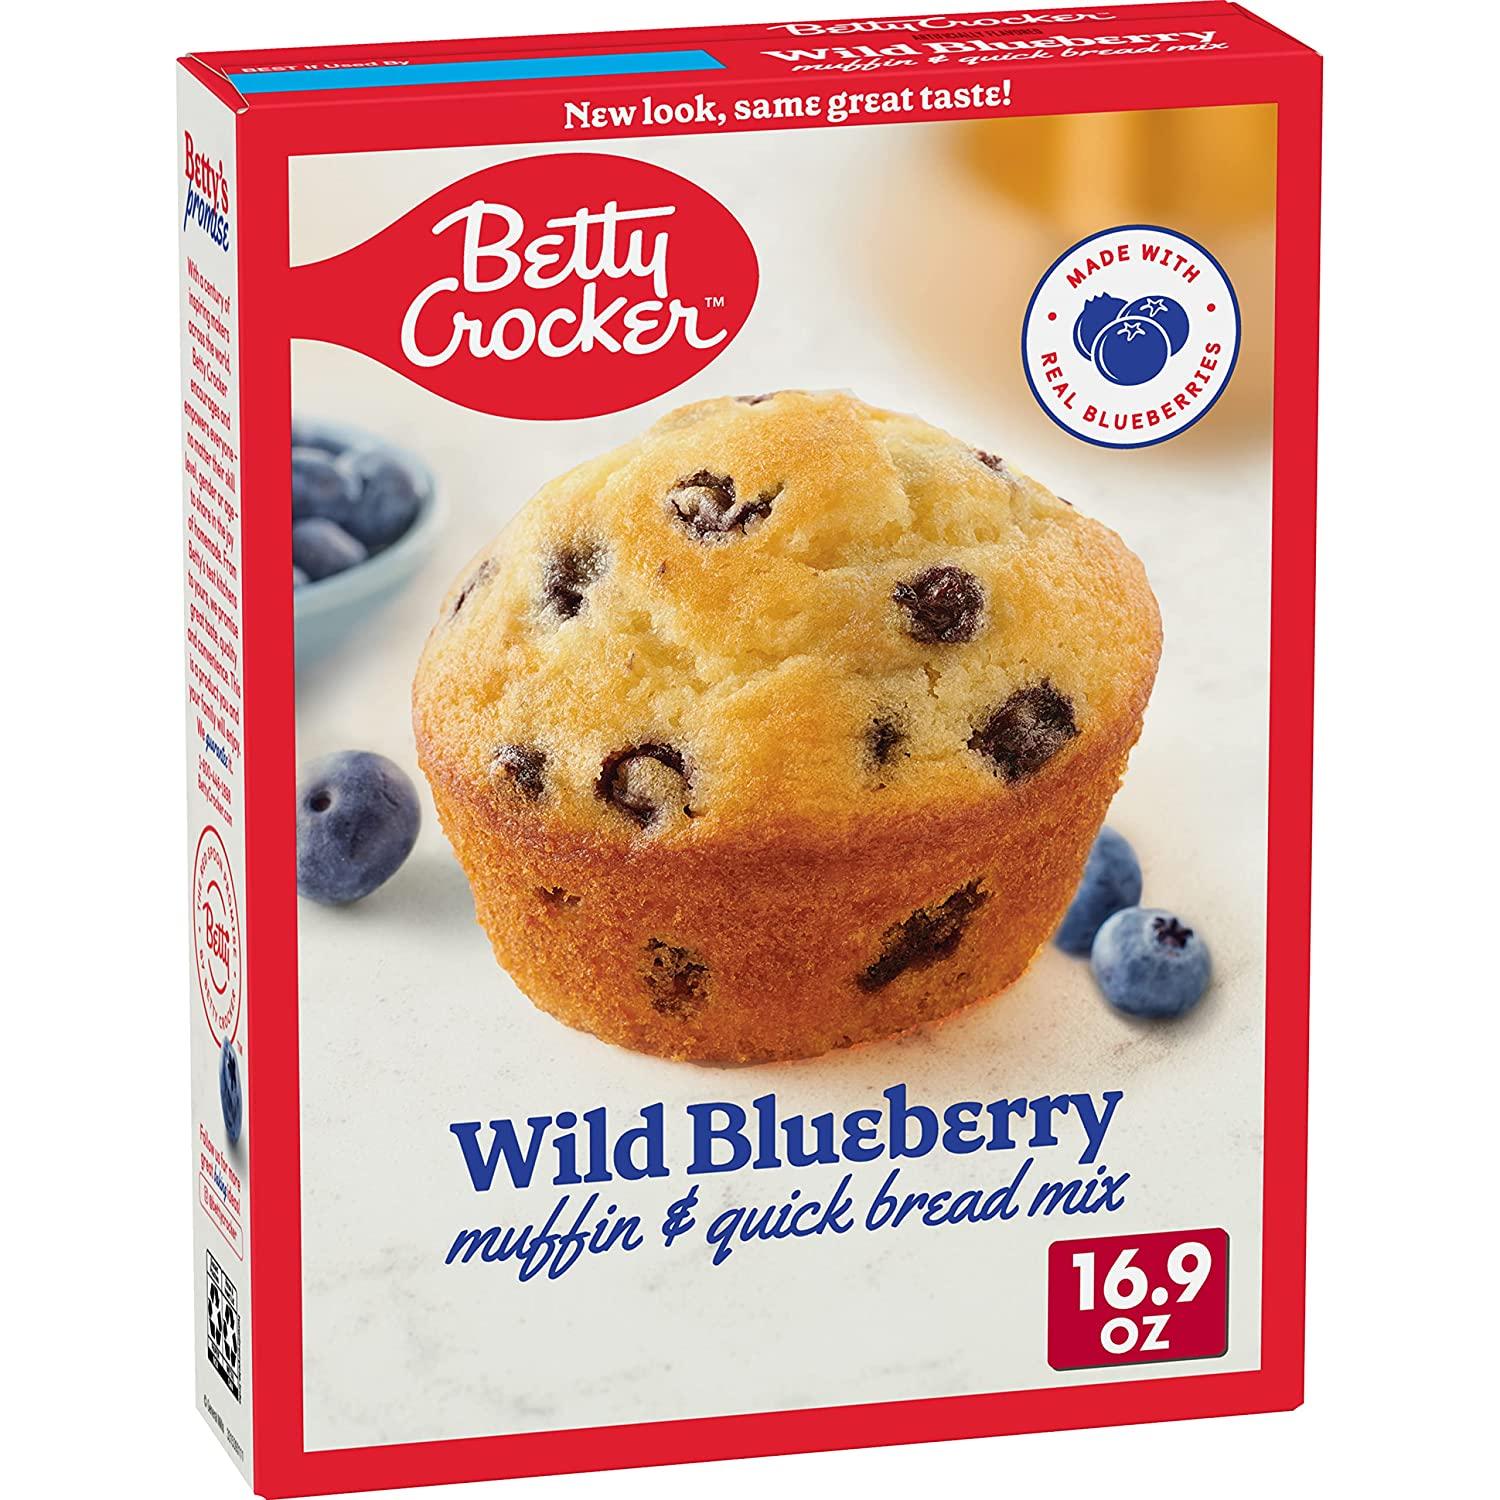 Betty Crocker Wild Blueberry Muffin for $1.86 Shipped